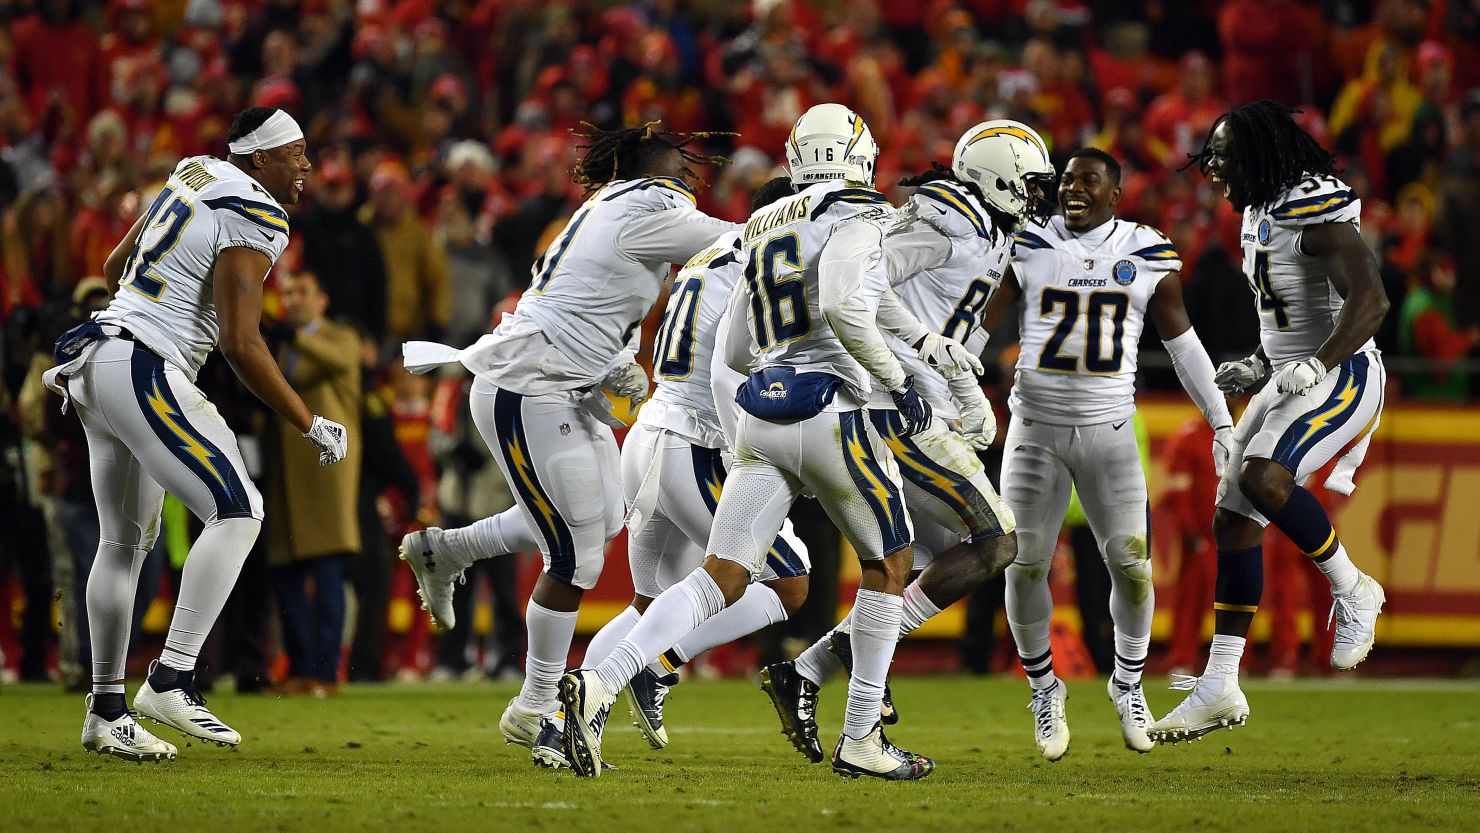 The Chargers celebrate after their comeback win against the Chiefs on Thursday. With the win, the Chargers are back in the playoffs for the first time since the 2013 season.